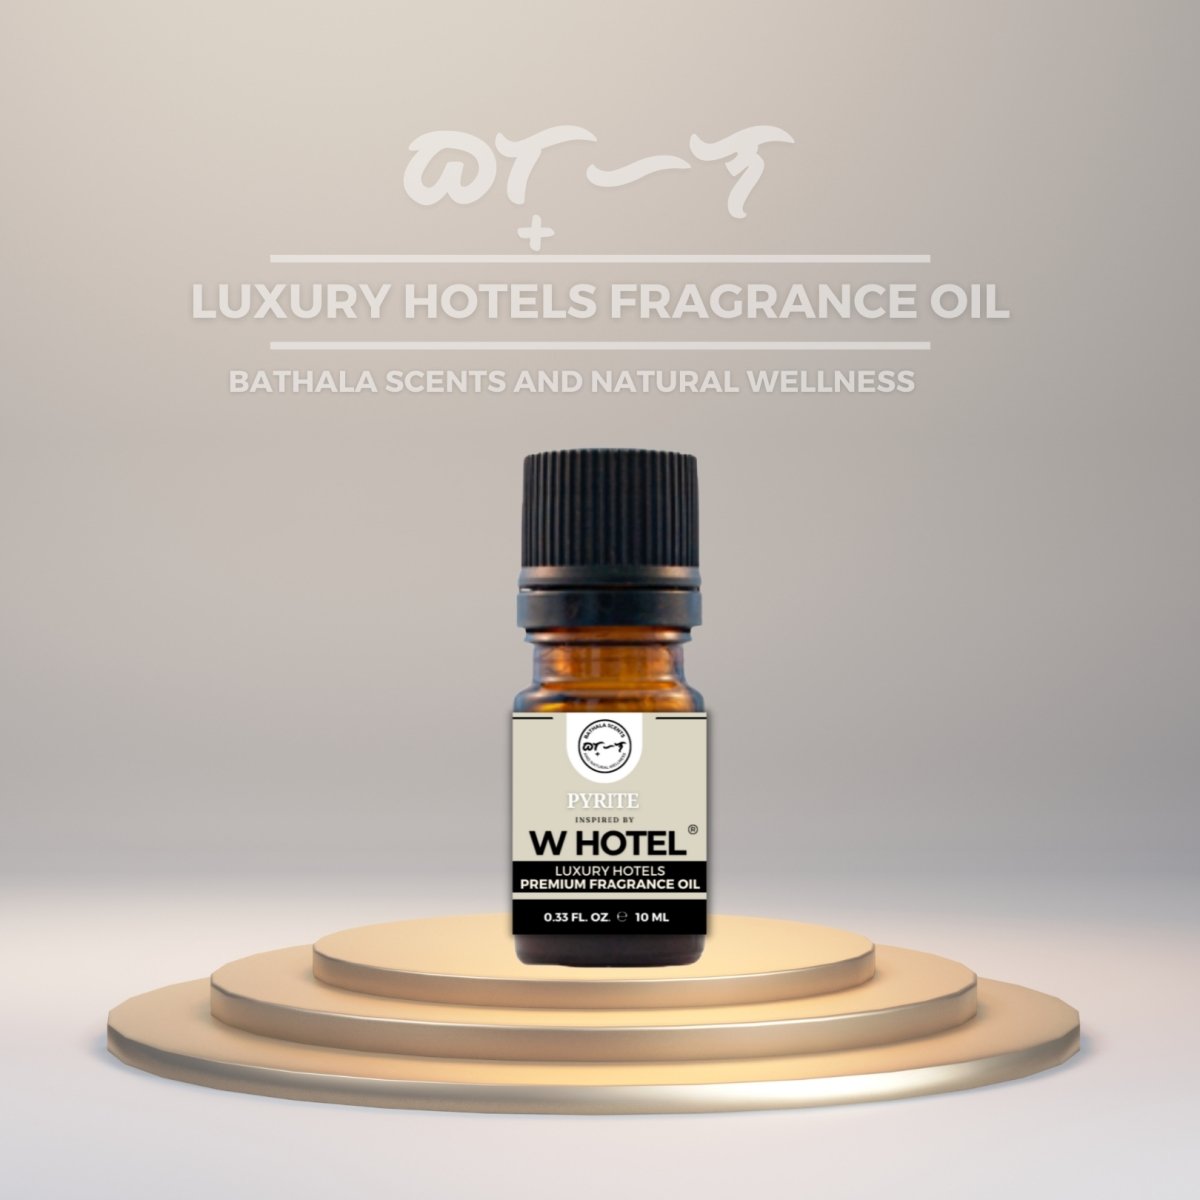 Pyrite Inspired by W Hotel Luxury Hotels Fragrance Oil 10ml - Bathala Scents and Natural Wellness